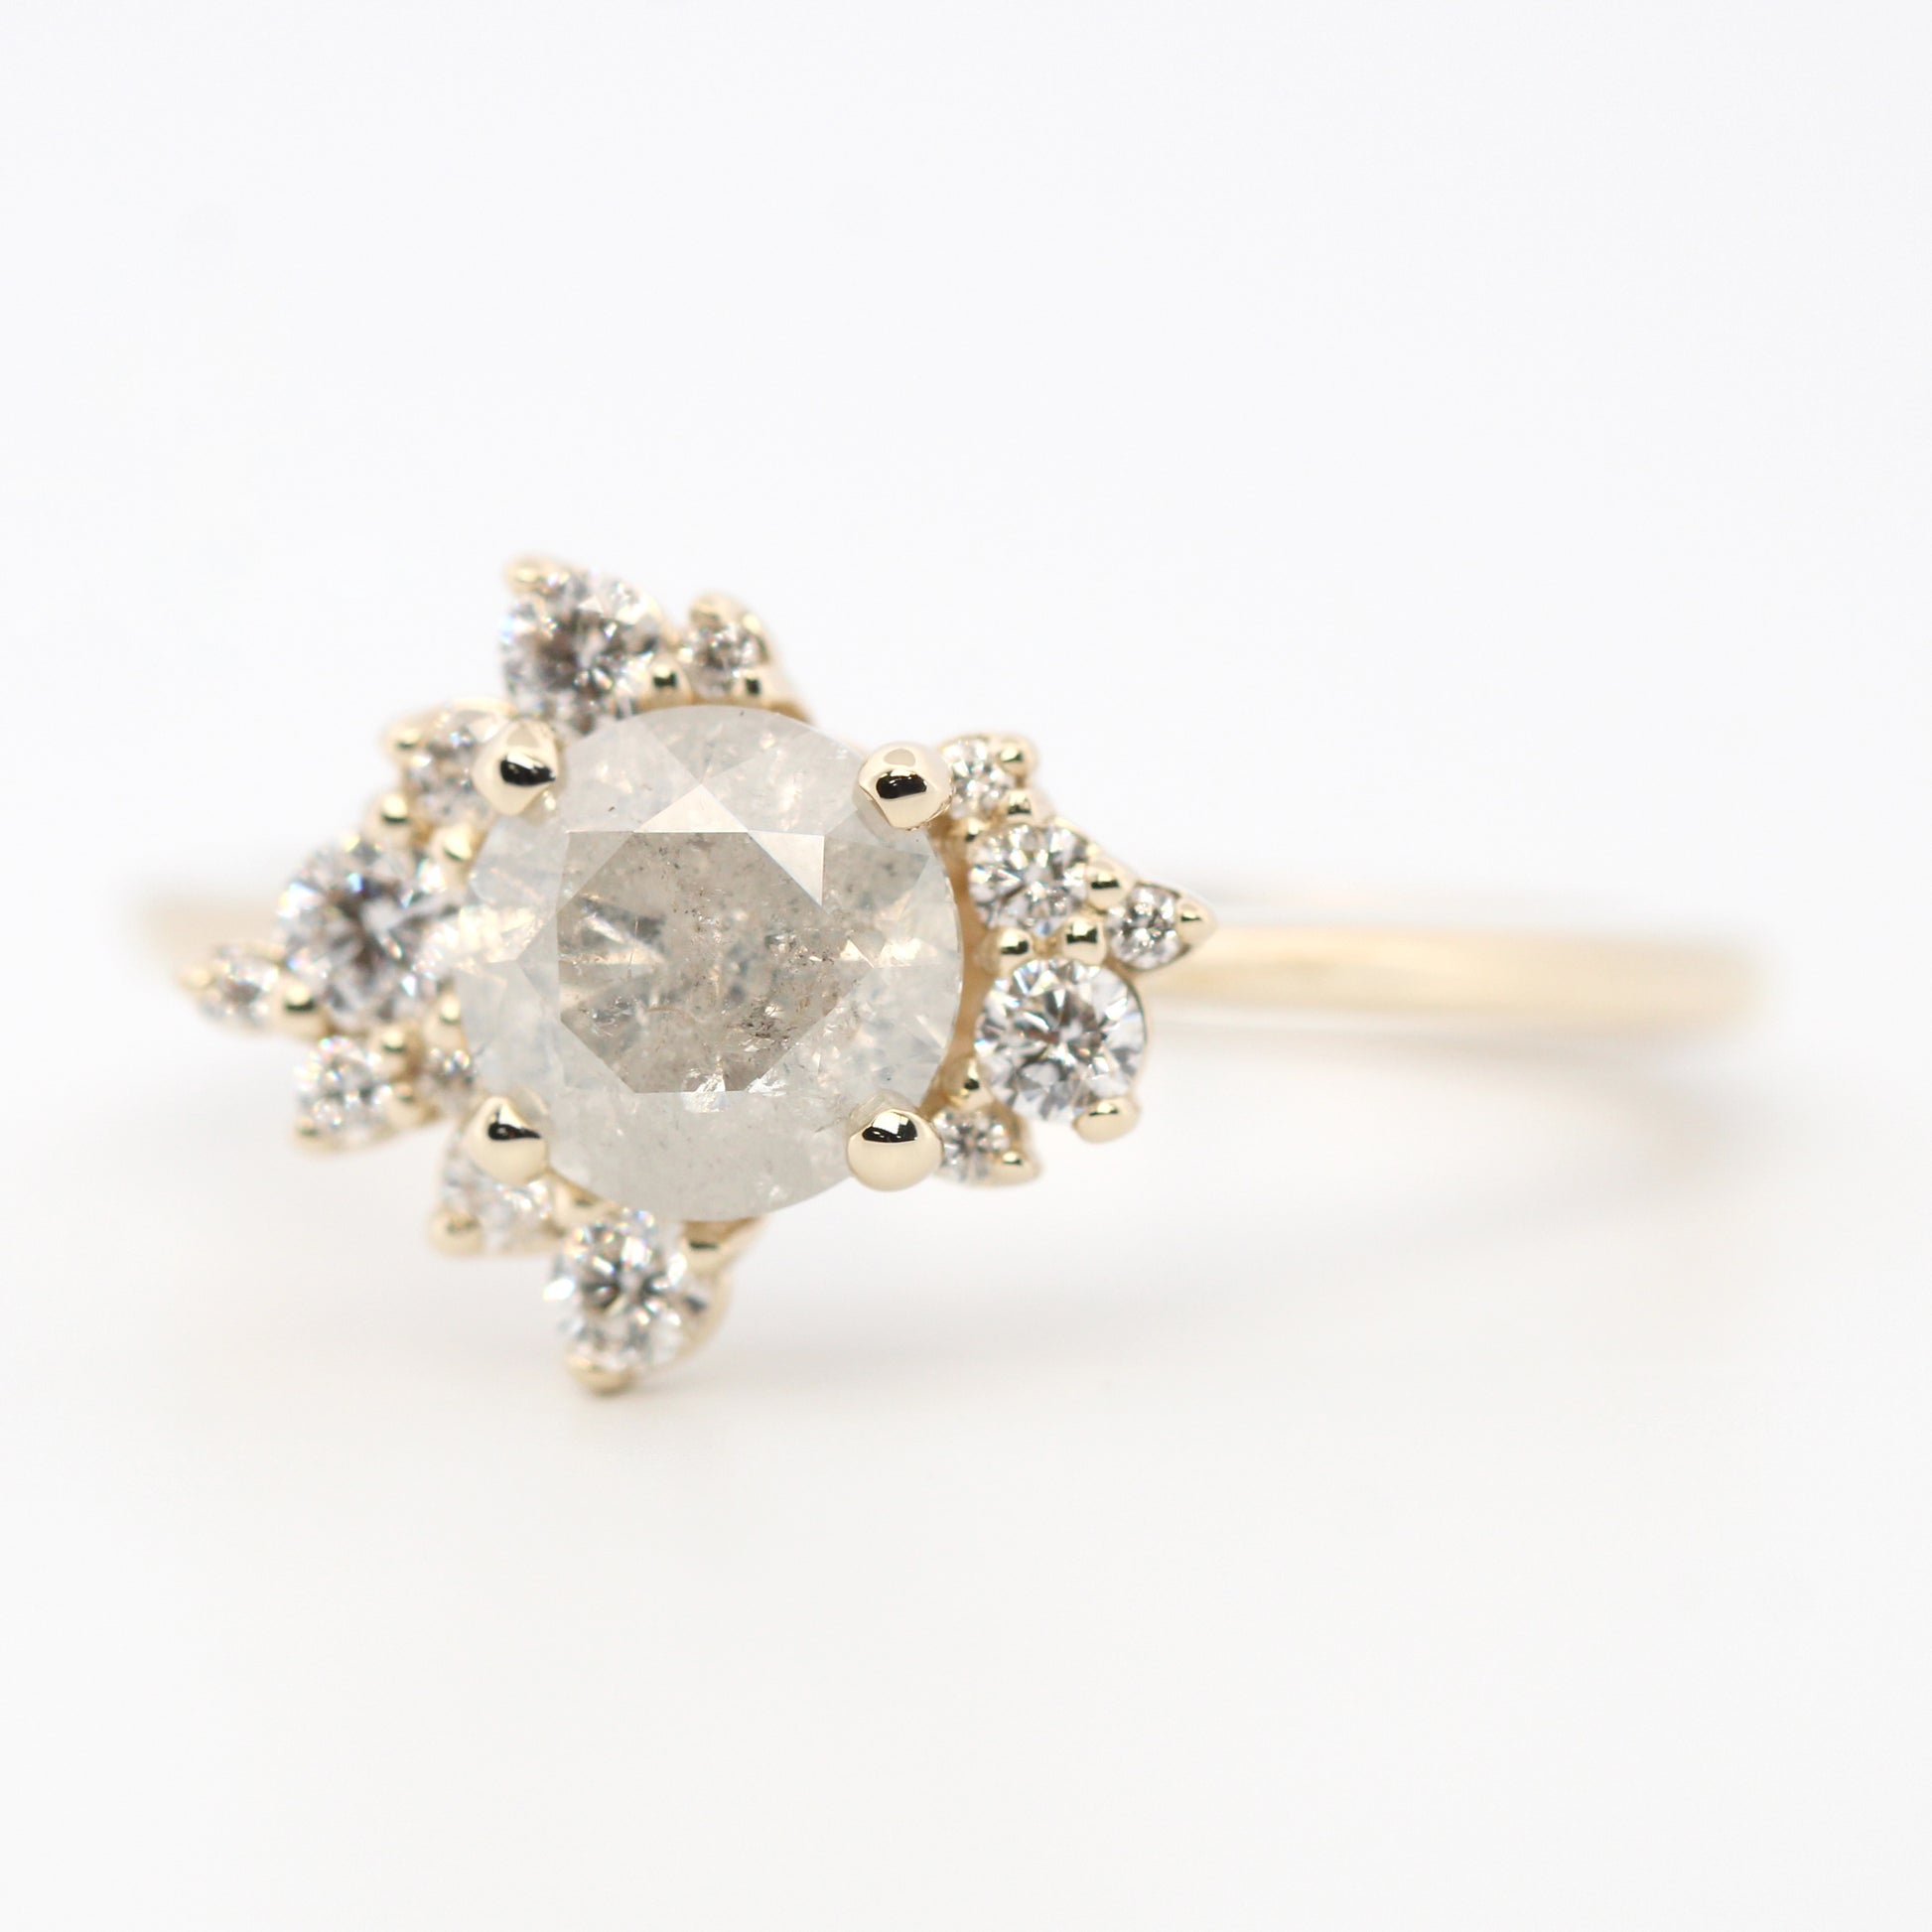 Orion Ring with a 1.04 Carat Round Light Gray Celestial Diamond and White Accent Diamonds in 14k Yellow Gold - Ready to Size and Ship - Midwinter Co. Alternative Bridal Rings and Modern Fine Jewelry